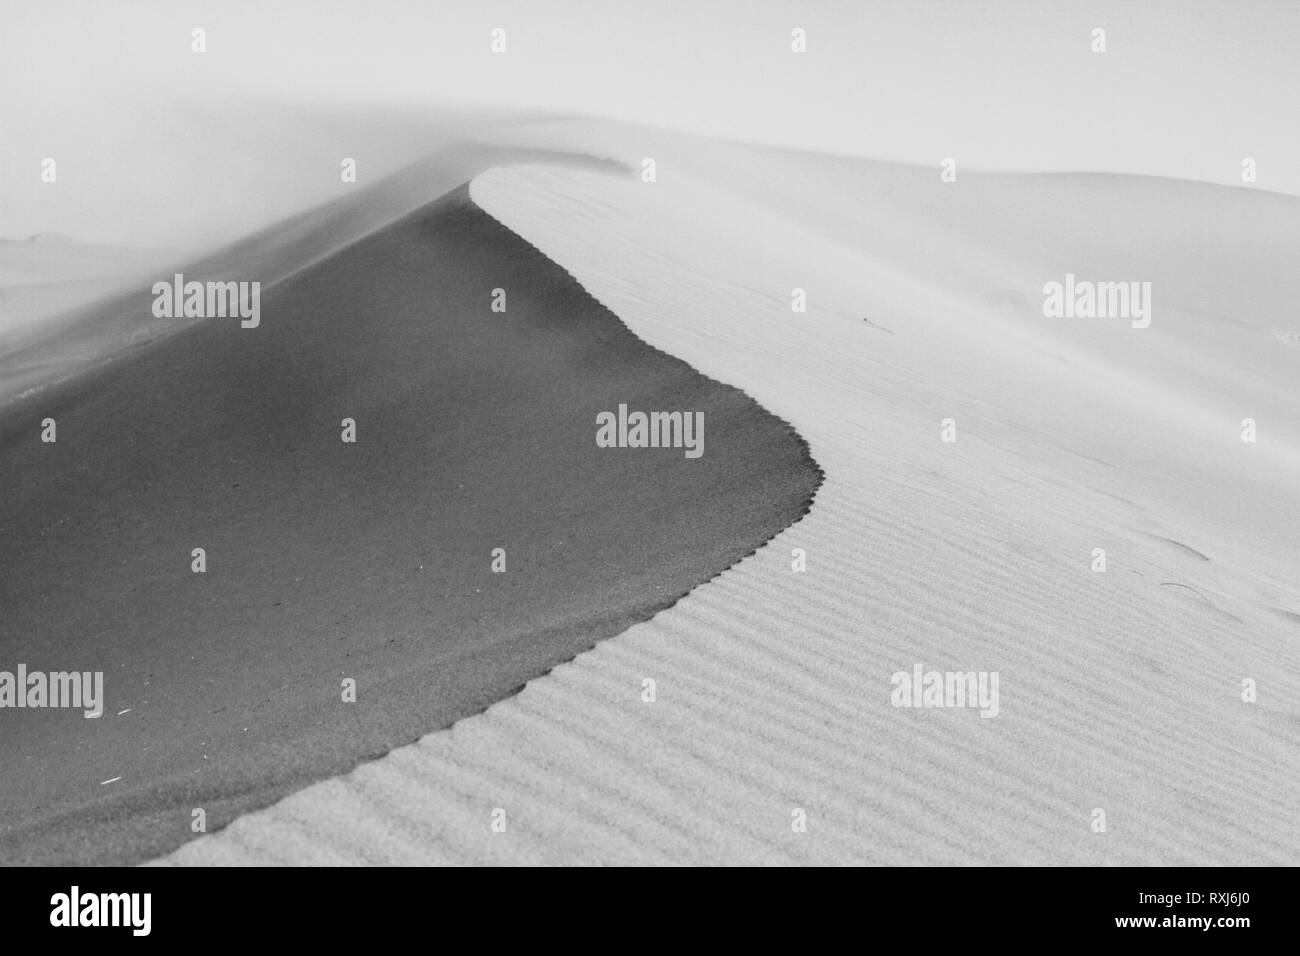 Dunes ridge detail, close up. Sand ripples and texture. Sand in the wind background. Sahara desert. Morocco. Black and white, monochrome. Stock Photo